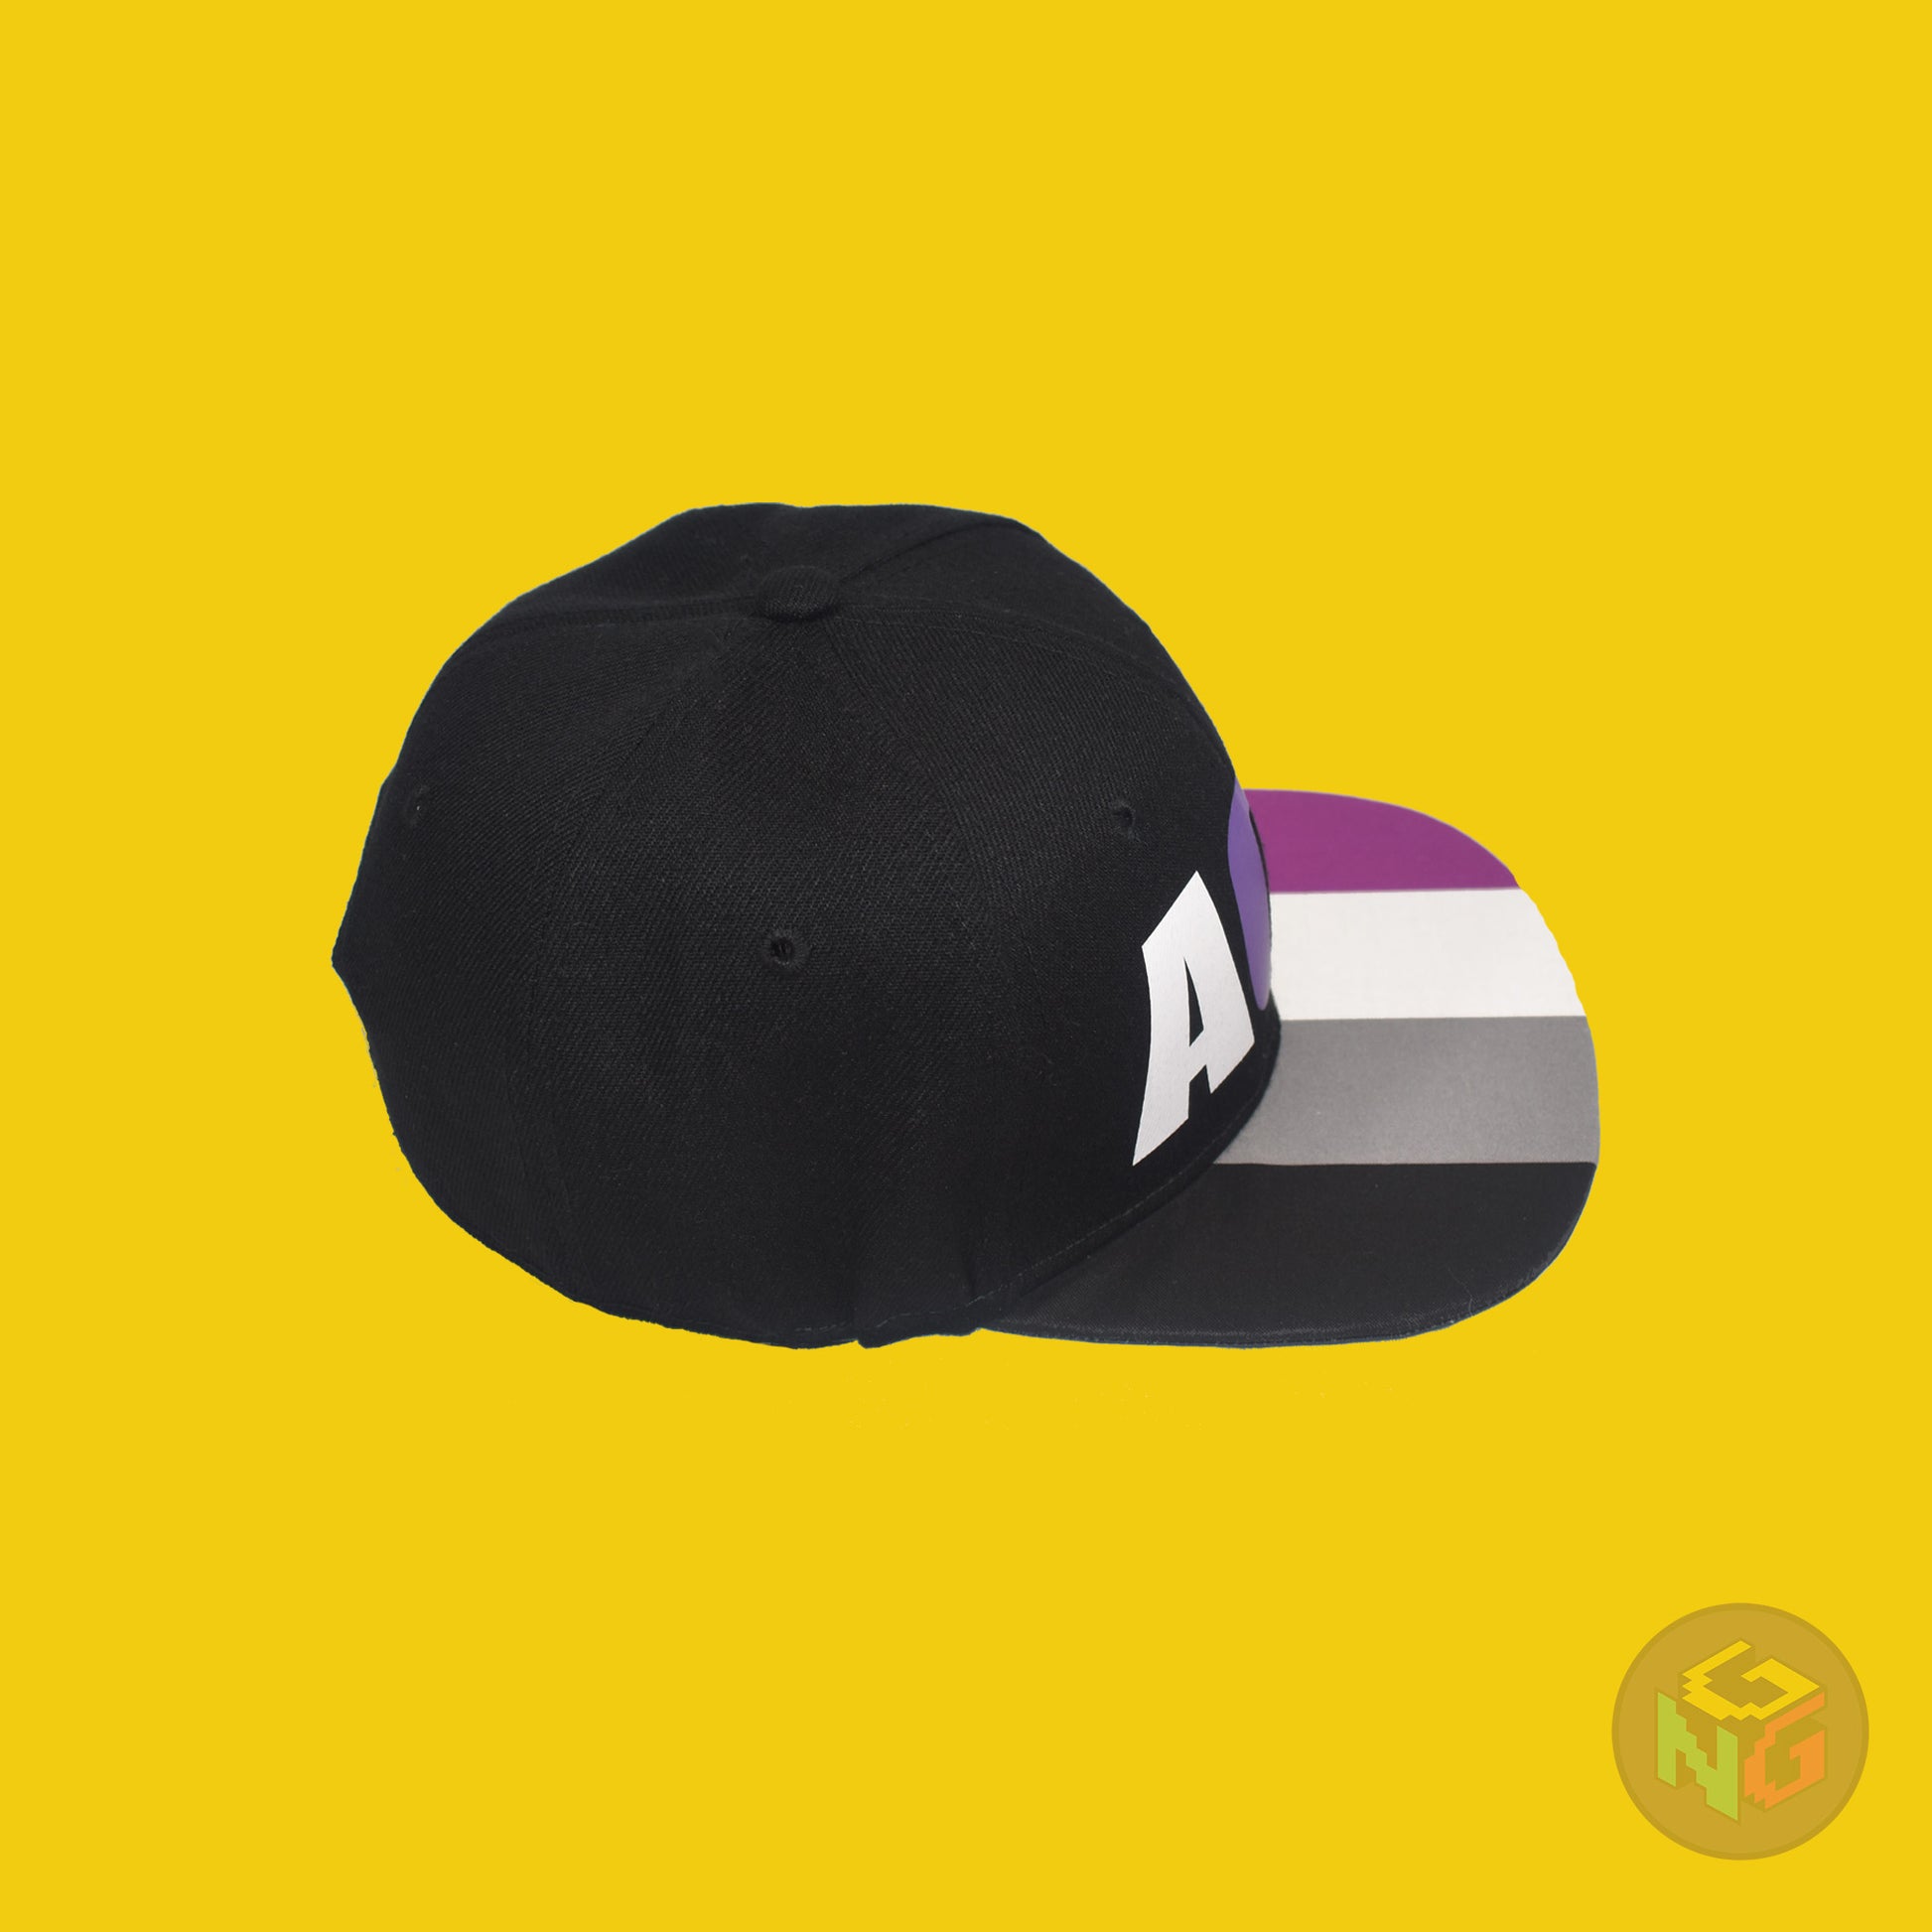 Black flat bill snapback hat. The brim has the asexual pride flag on both sides and the front of the hat has the word “ACE” in white, purple, and grey. Right view